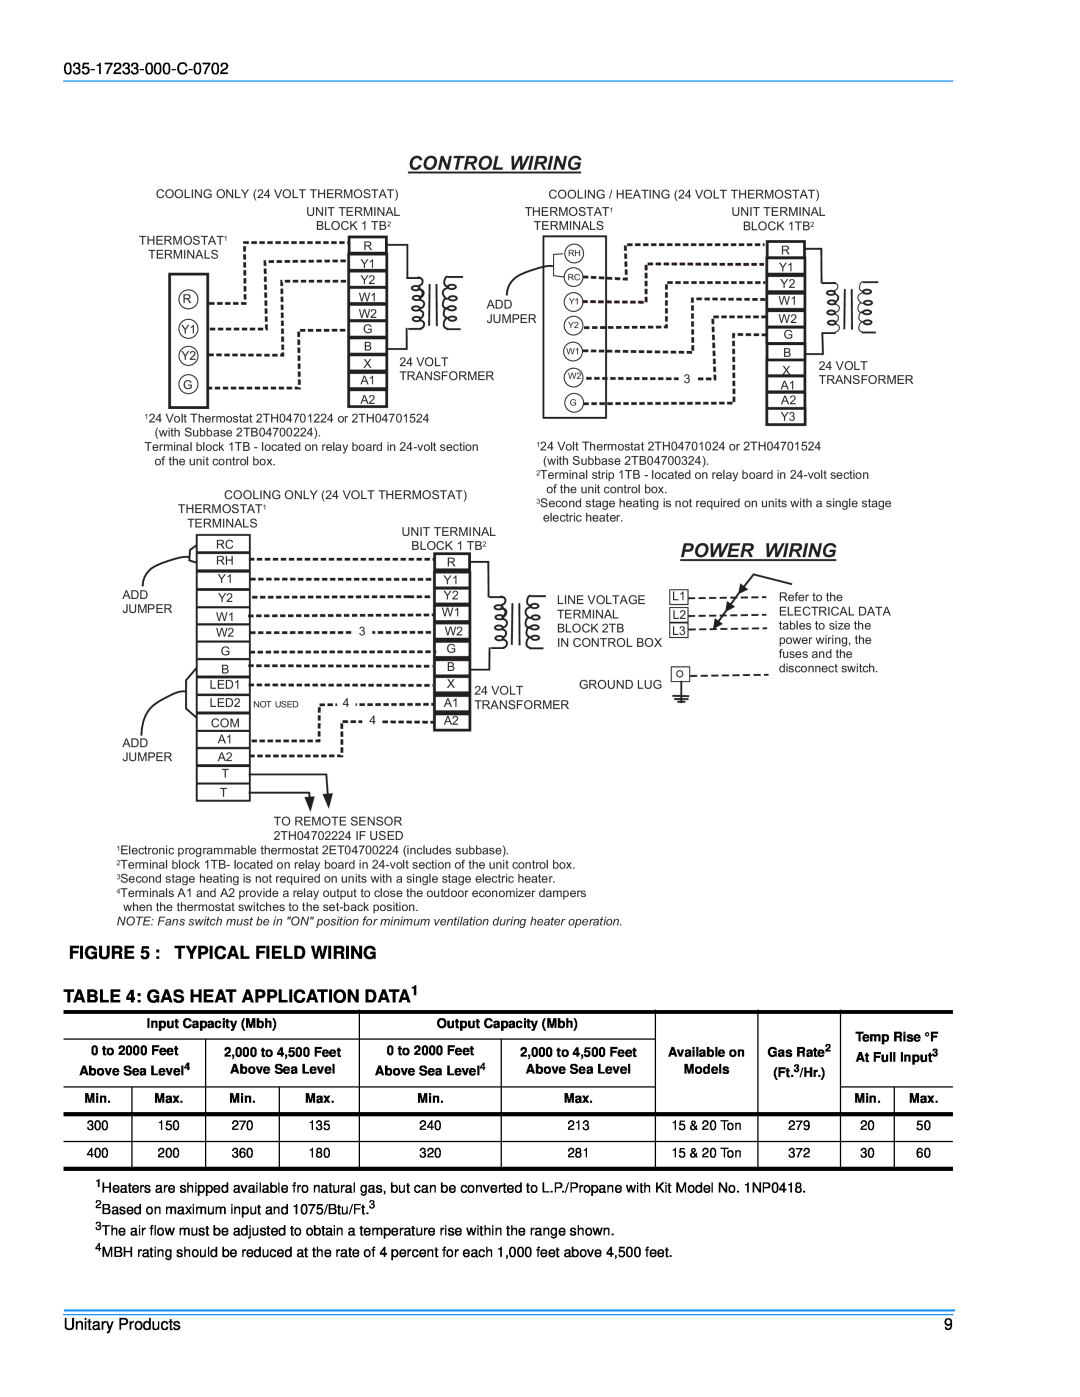 Energy Tech Laboratories DHG180, DHG240 Controlwiring, Power Wiring, Typical Field Wiring, GAS HEAT APPLICATION DATA1 